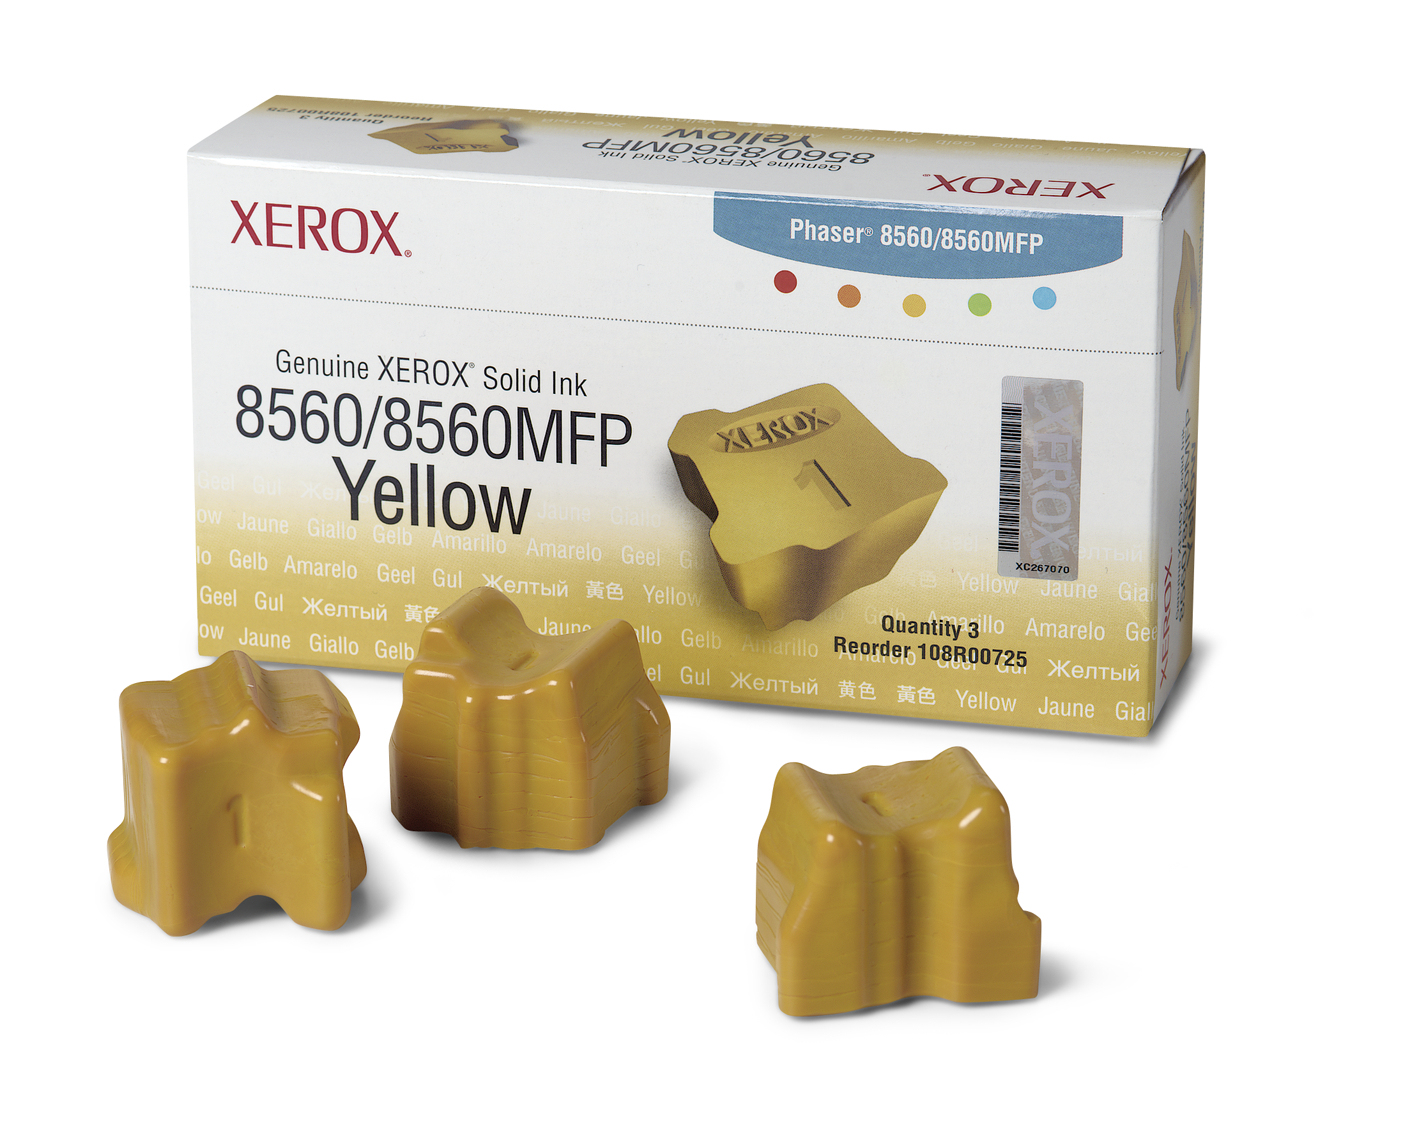 Xerox SOLID INK YELLOW (3 STICKS) F/ PHASER 8560/8560 MFP